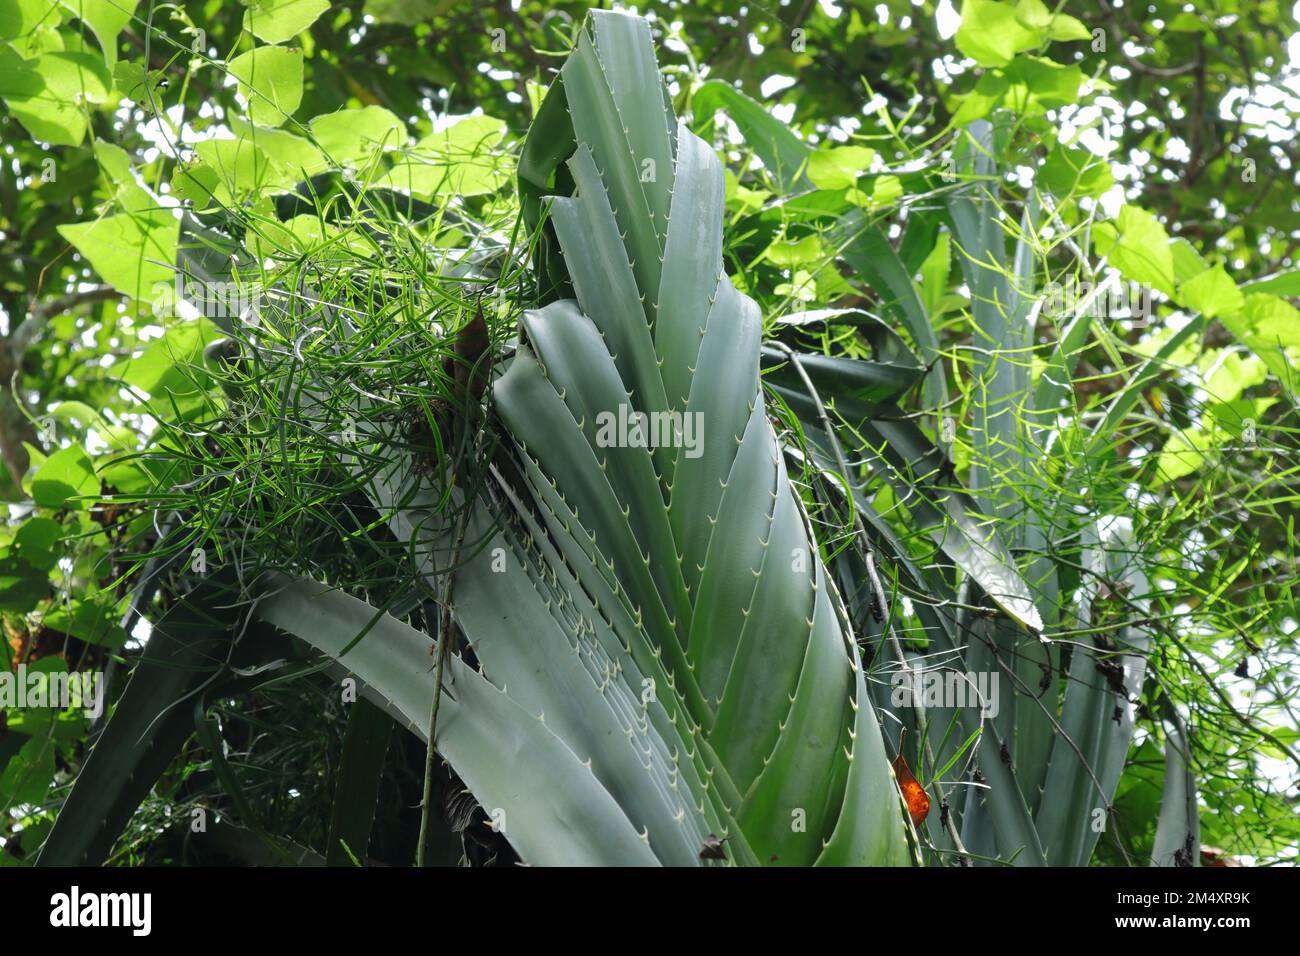 A Wetakeiya or known as False Pineapple tree (Pandanus Kaida) with leaves stacked and could not spread because of an Asparagus Racemosus vine Stock Photo